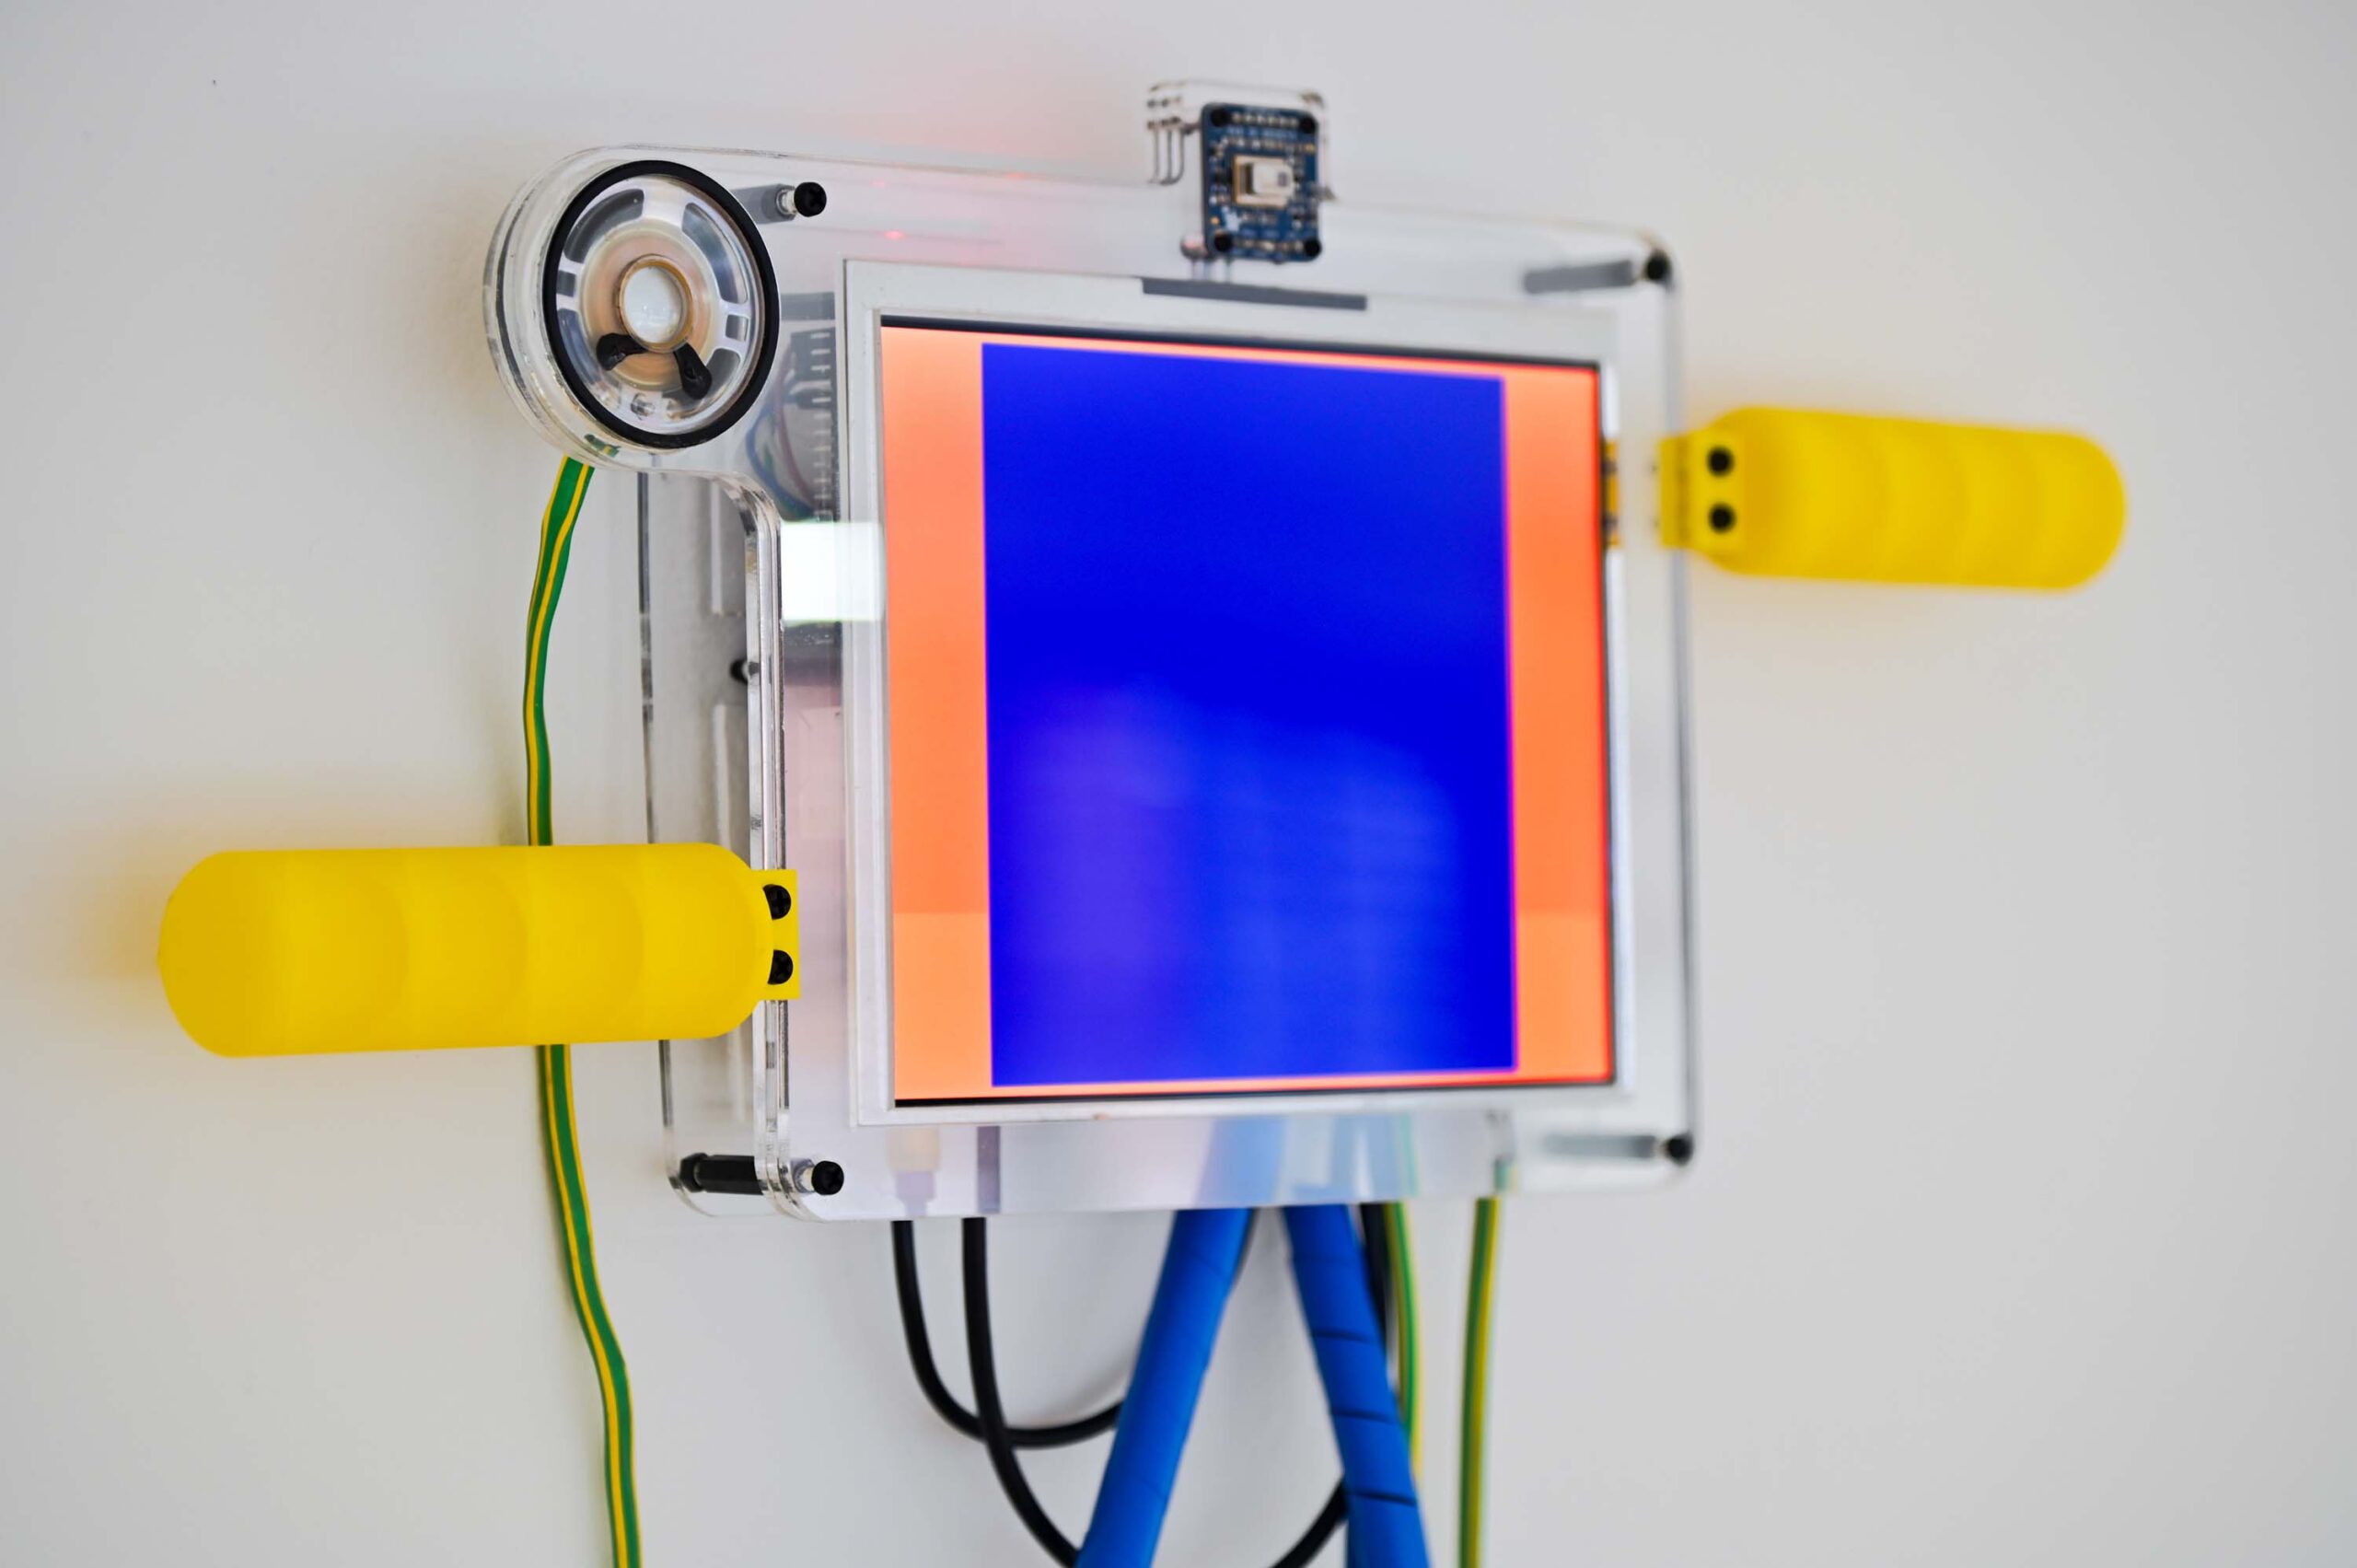 close-up of artwork with brightly coloured cables, 3d printed parts and a large screen.